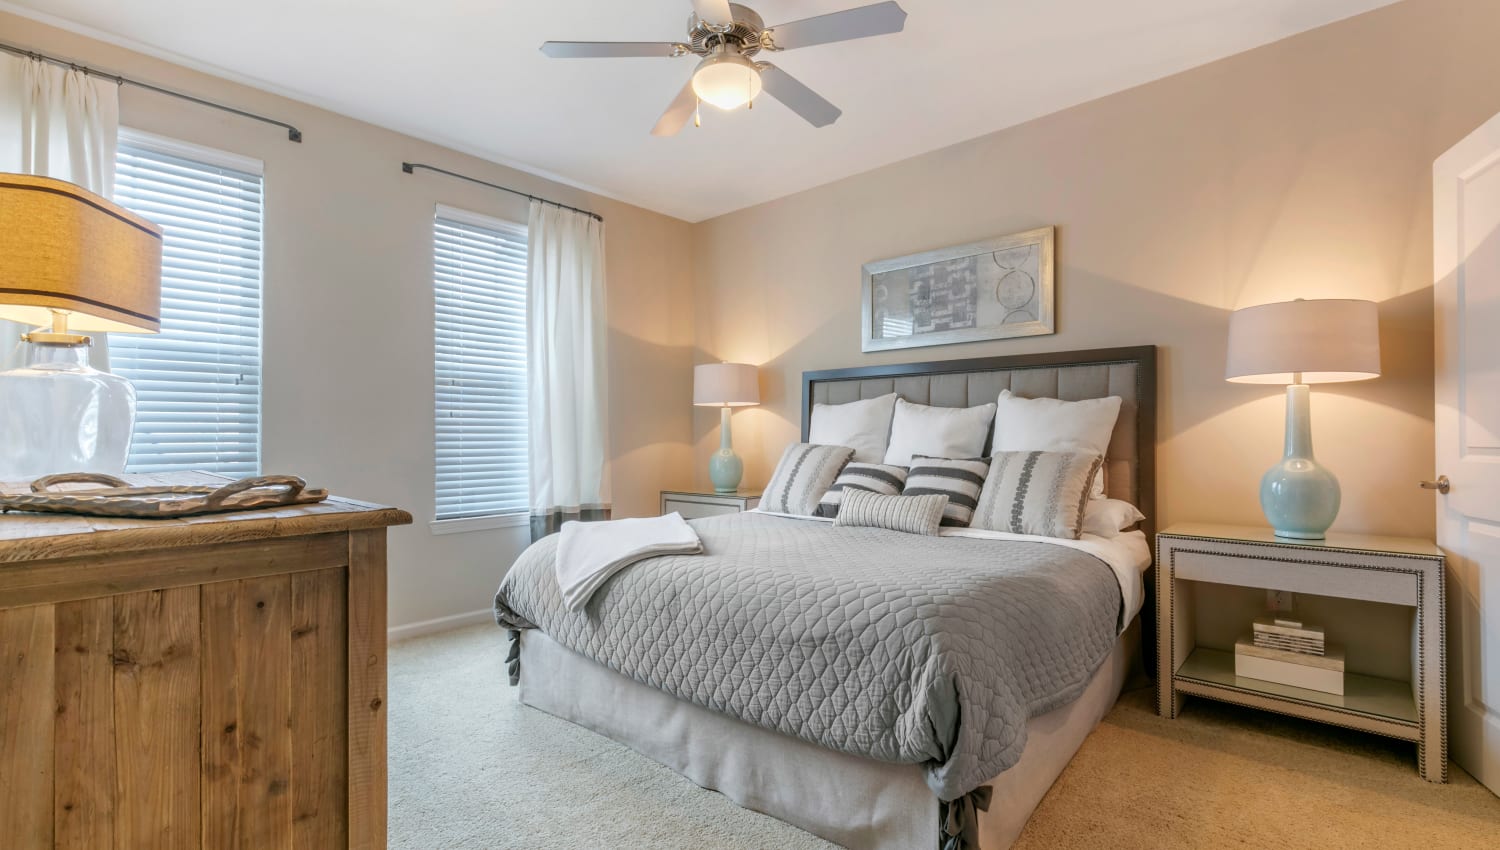 Spacious model bedroom with ceiling fan and plush carpeting at The Village at Apison Pike in Ooltewah, Tennessee